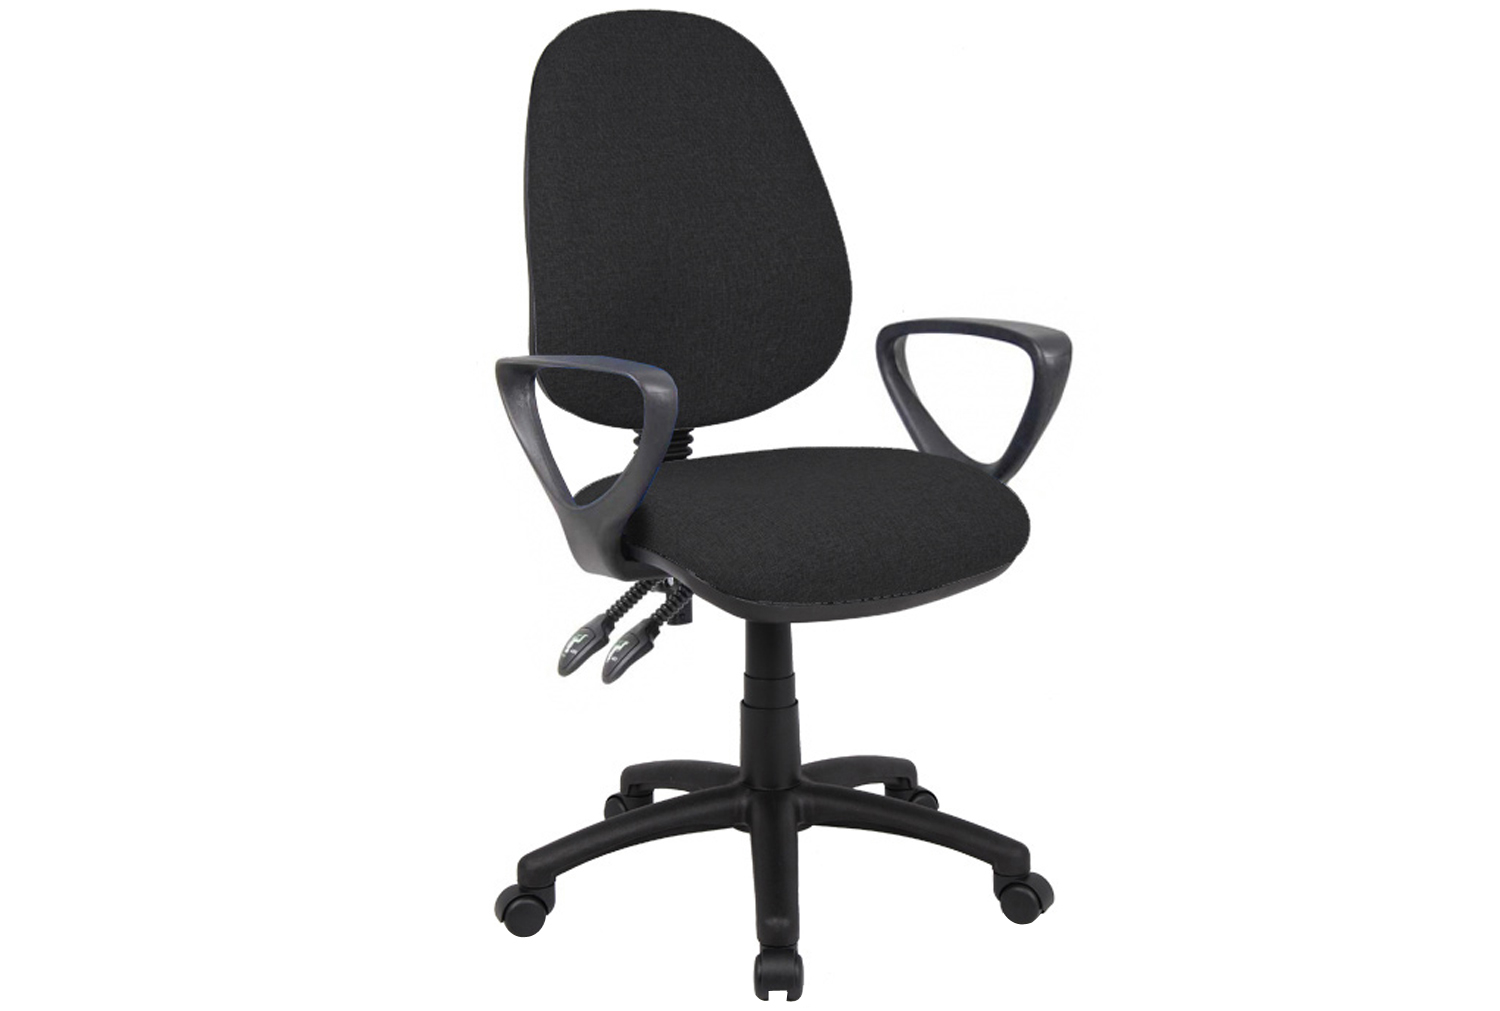 Full Lumbar 2 Lever Operator Office Chair With Fixed Arms, Black, Express Delivery